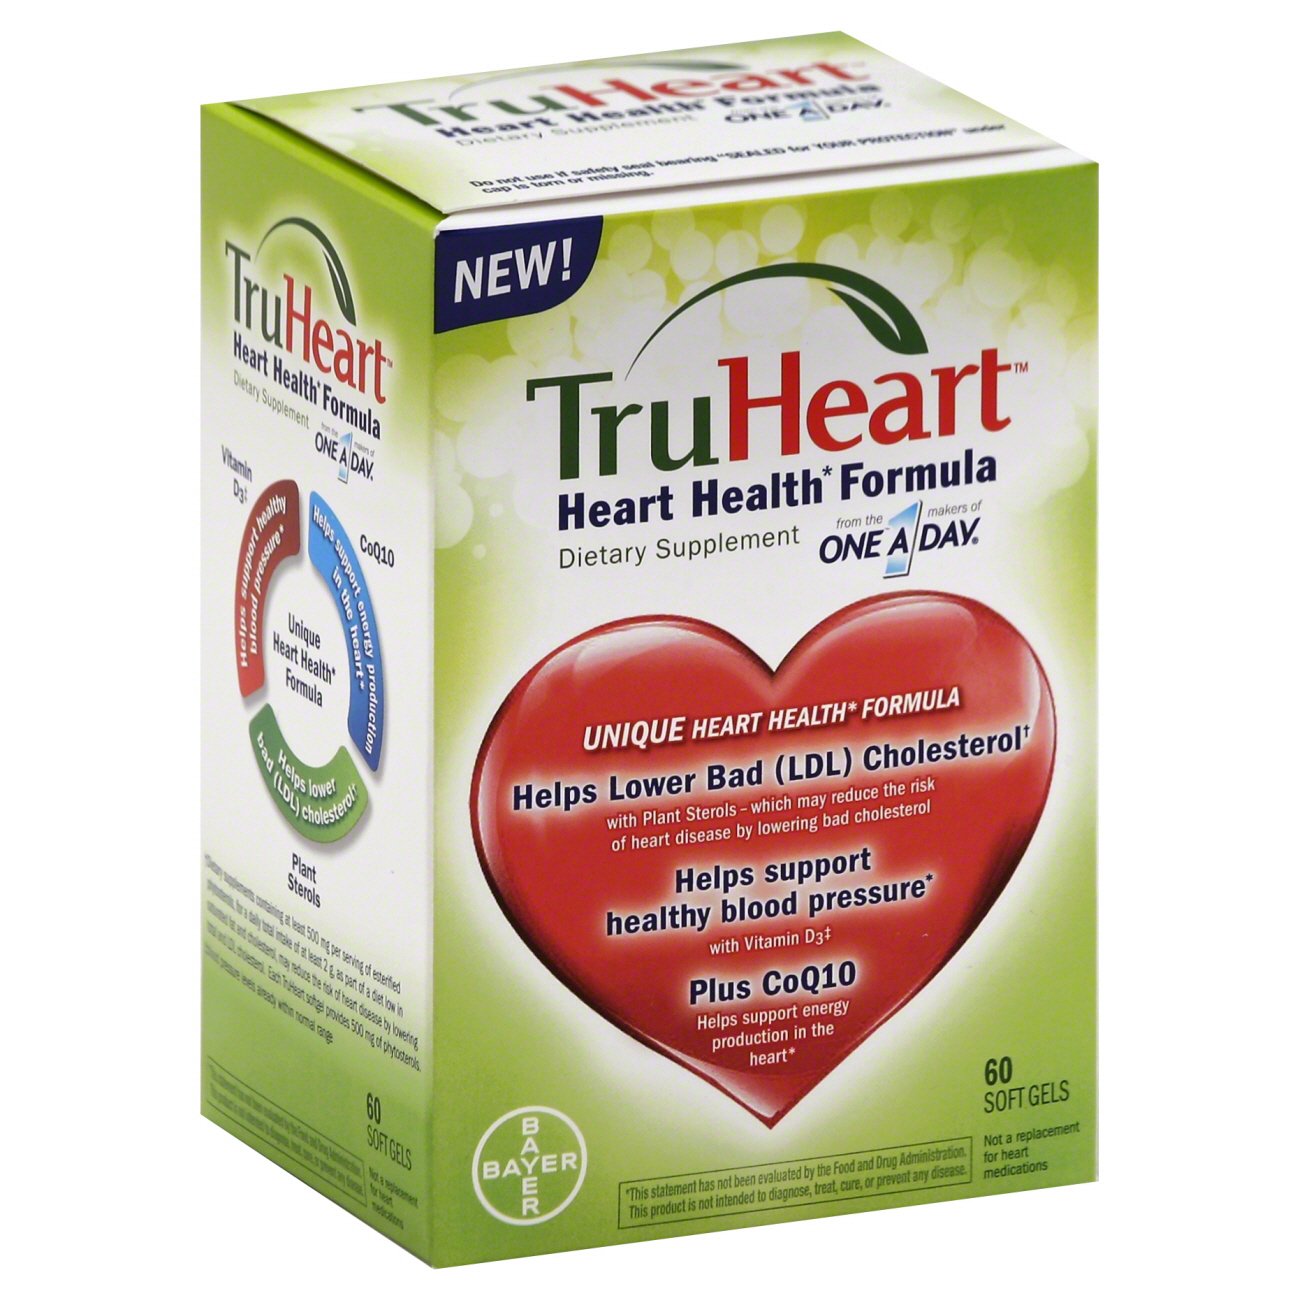 Nutritional supplement for heart health